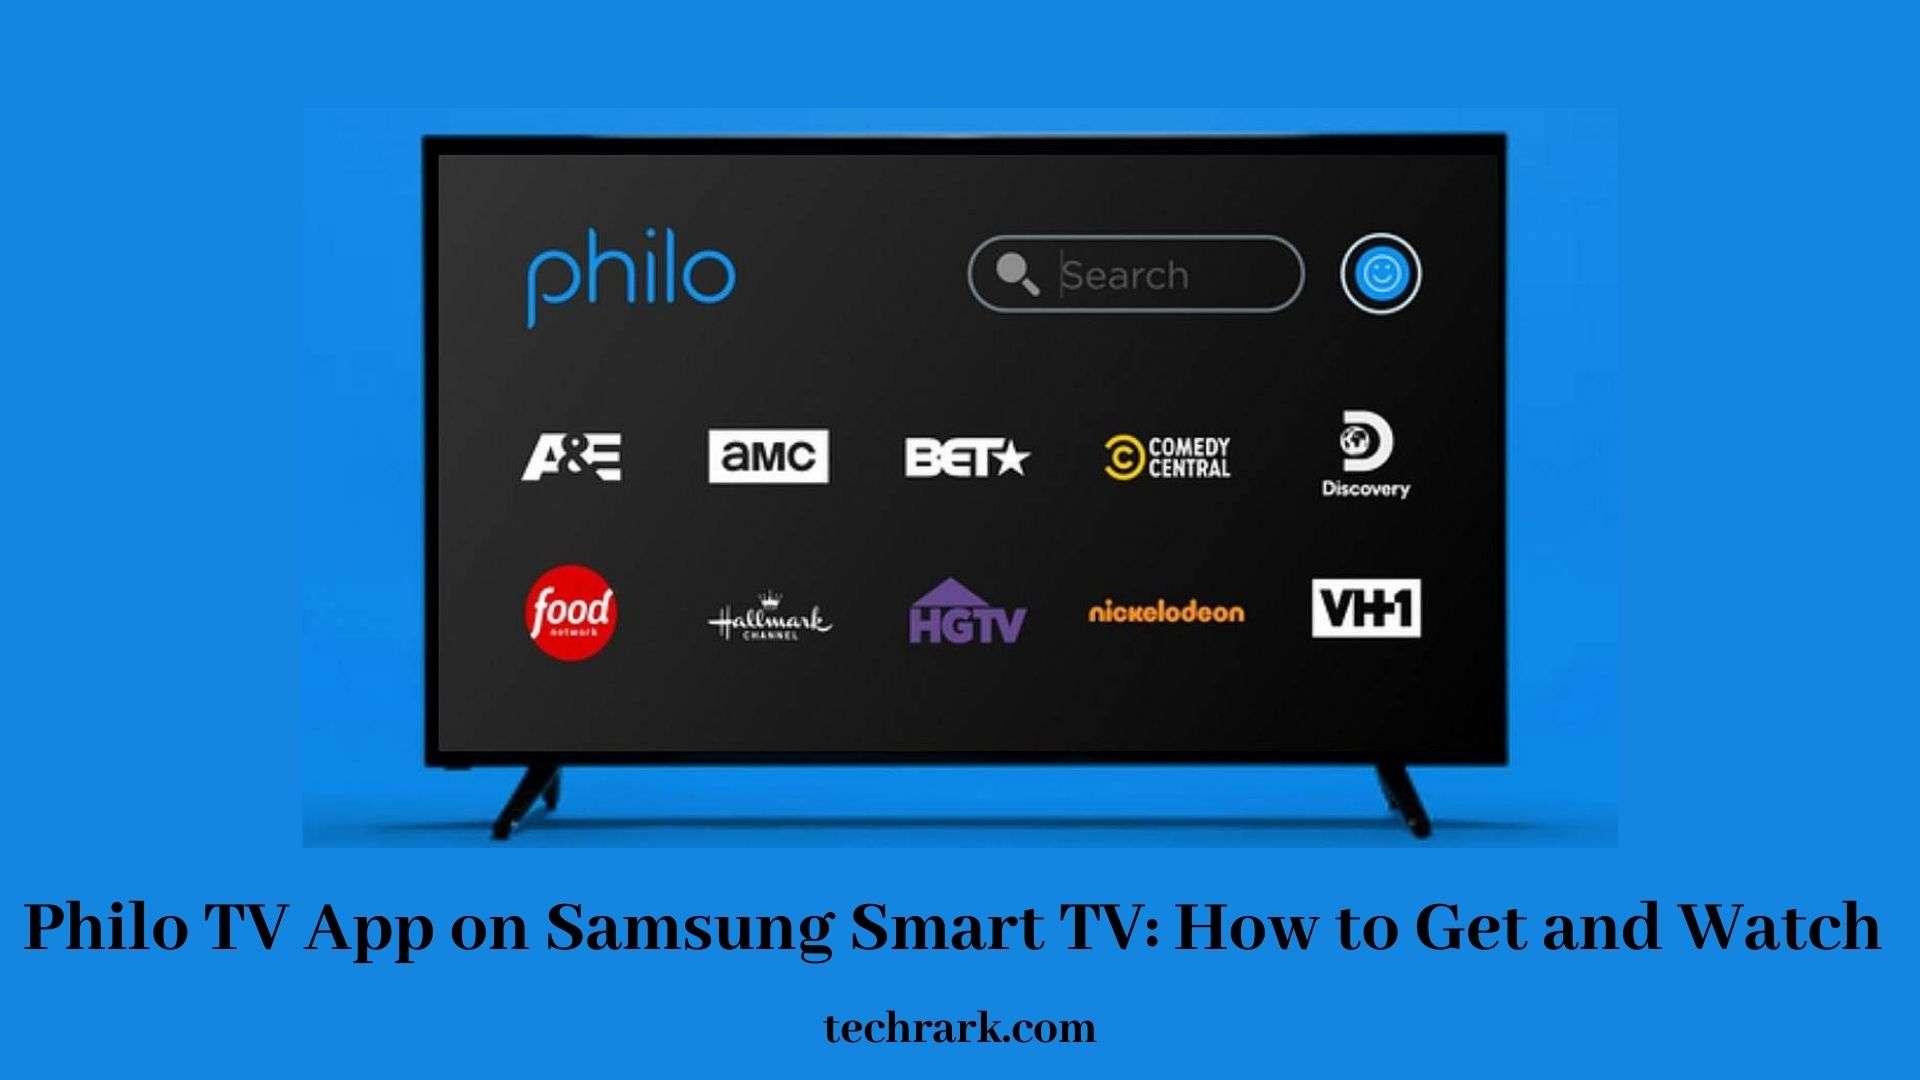 Philo TV App on Samsung Smart TV: How to Get and Watch [2021]